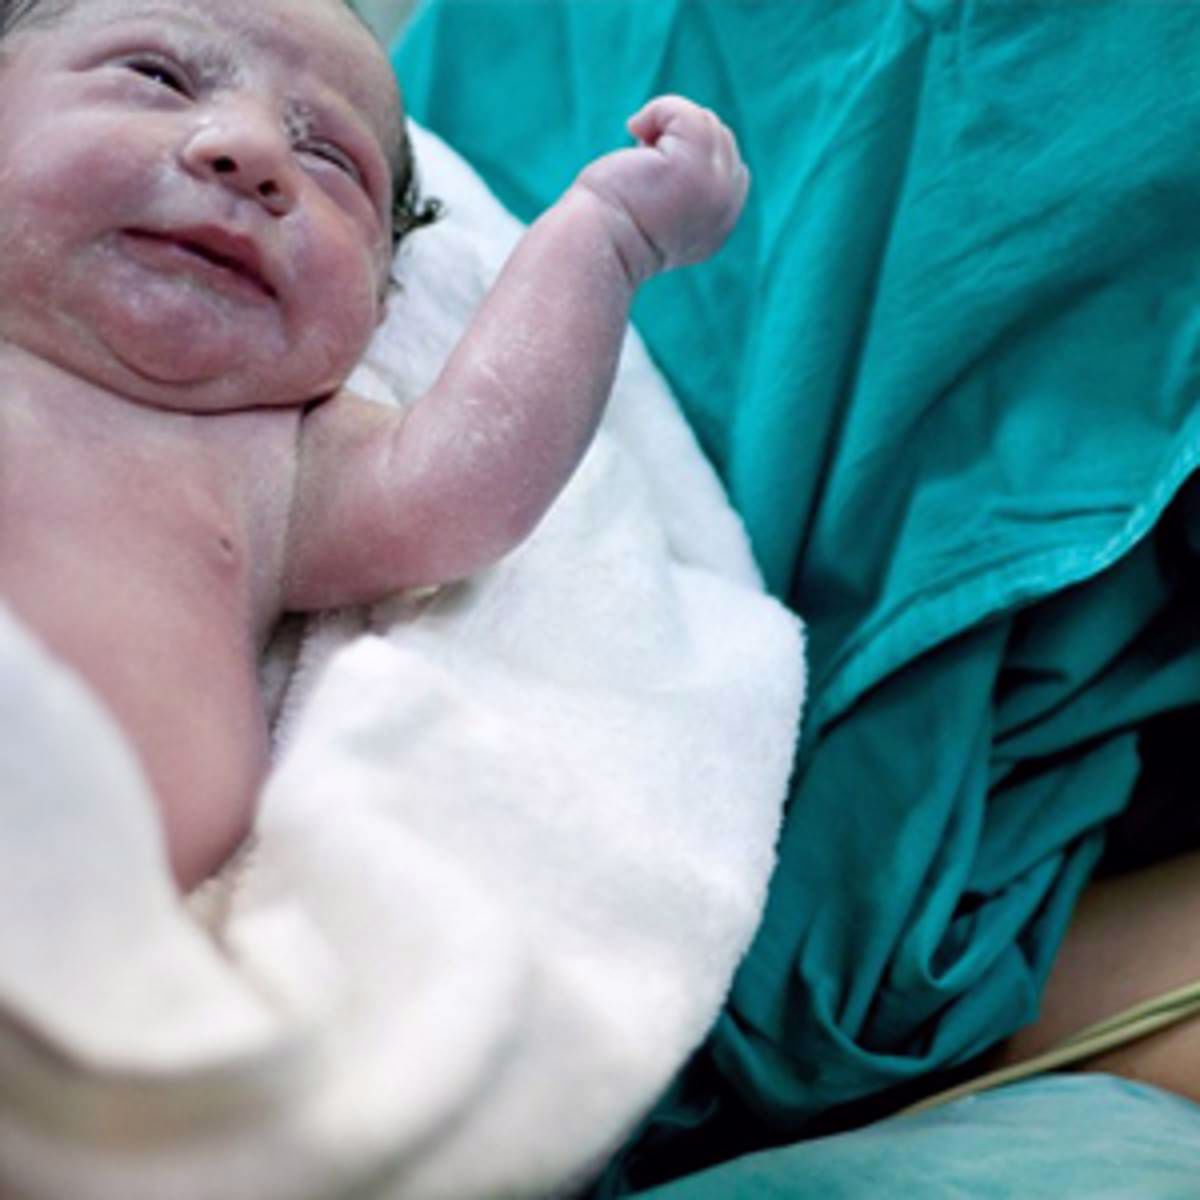 5 Things You Need to Know About C-Sections